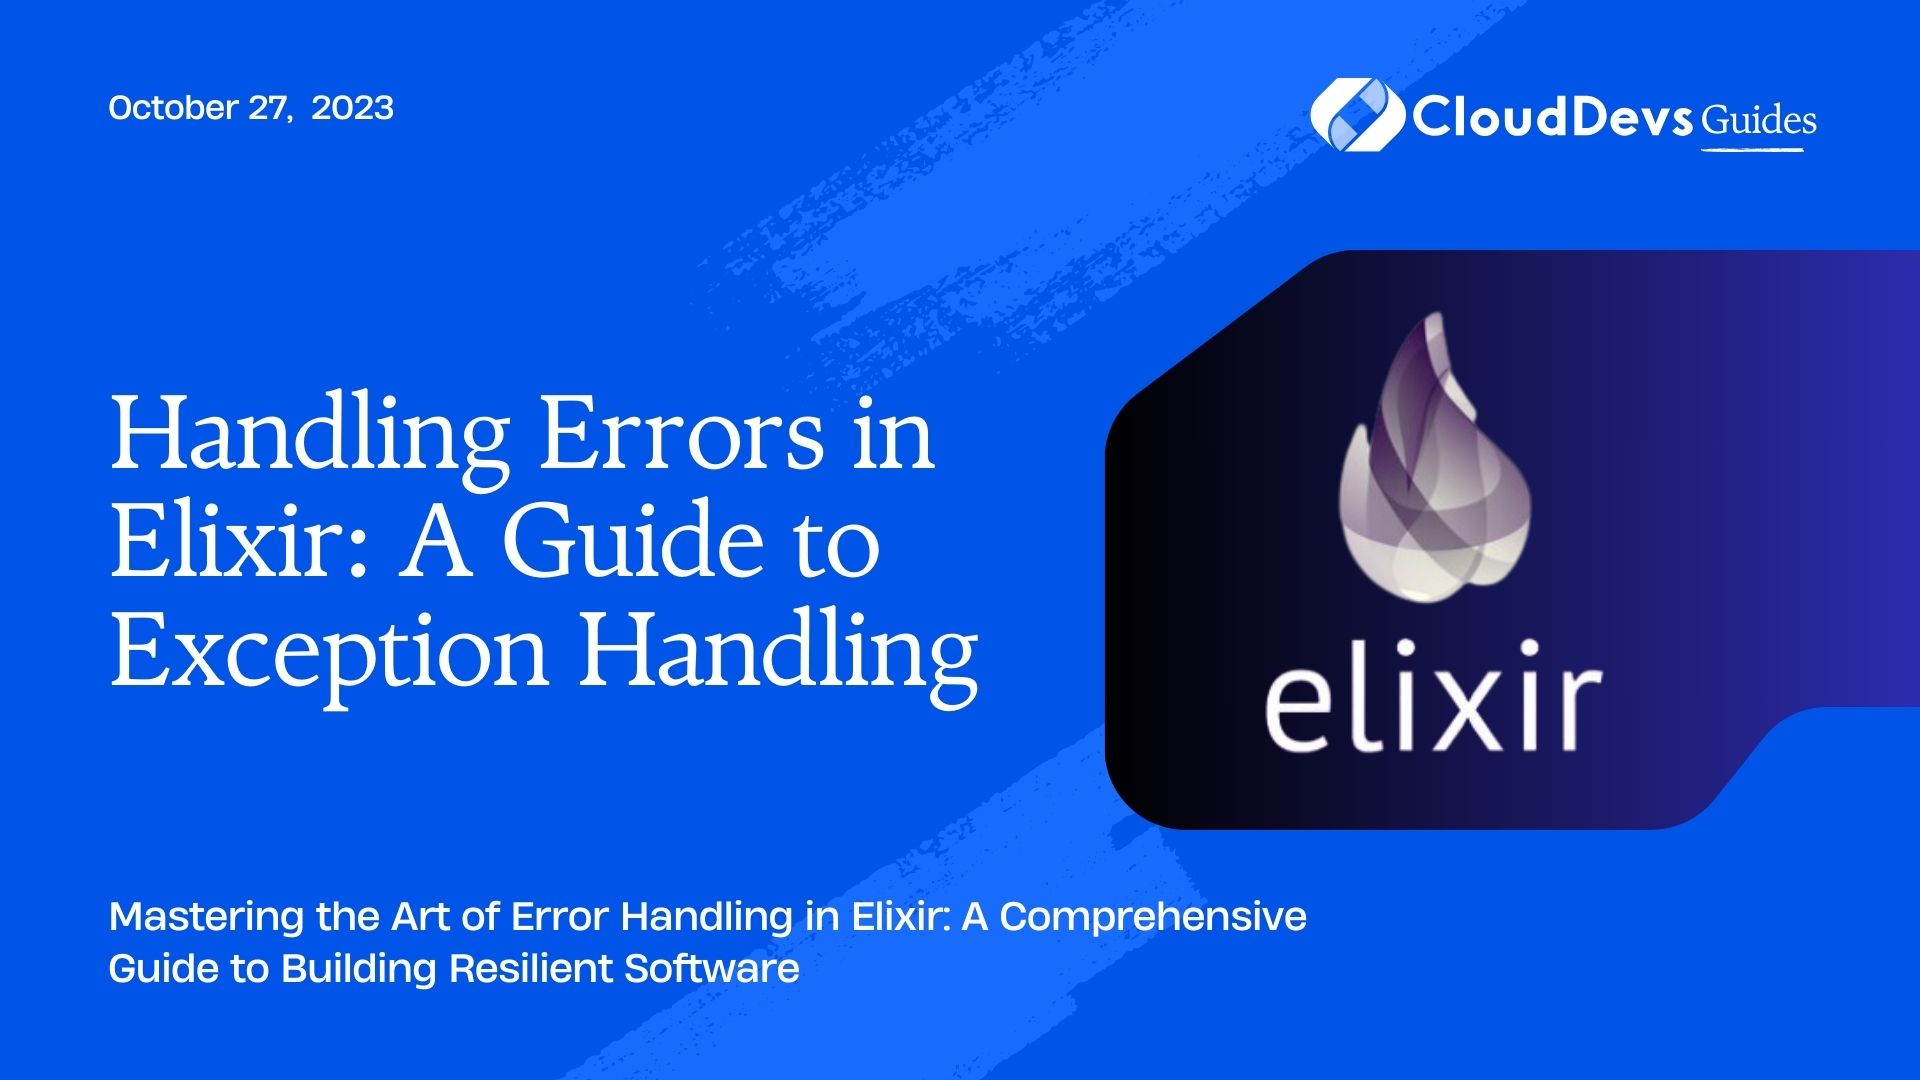 Handling Errors in Elixir: A Guide to Exception Handling